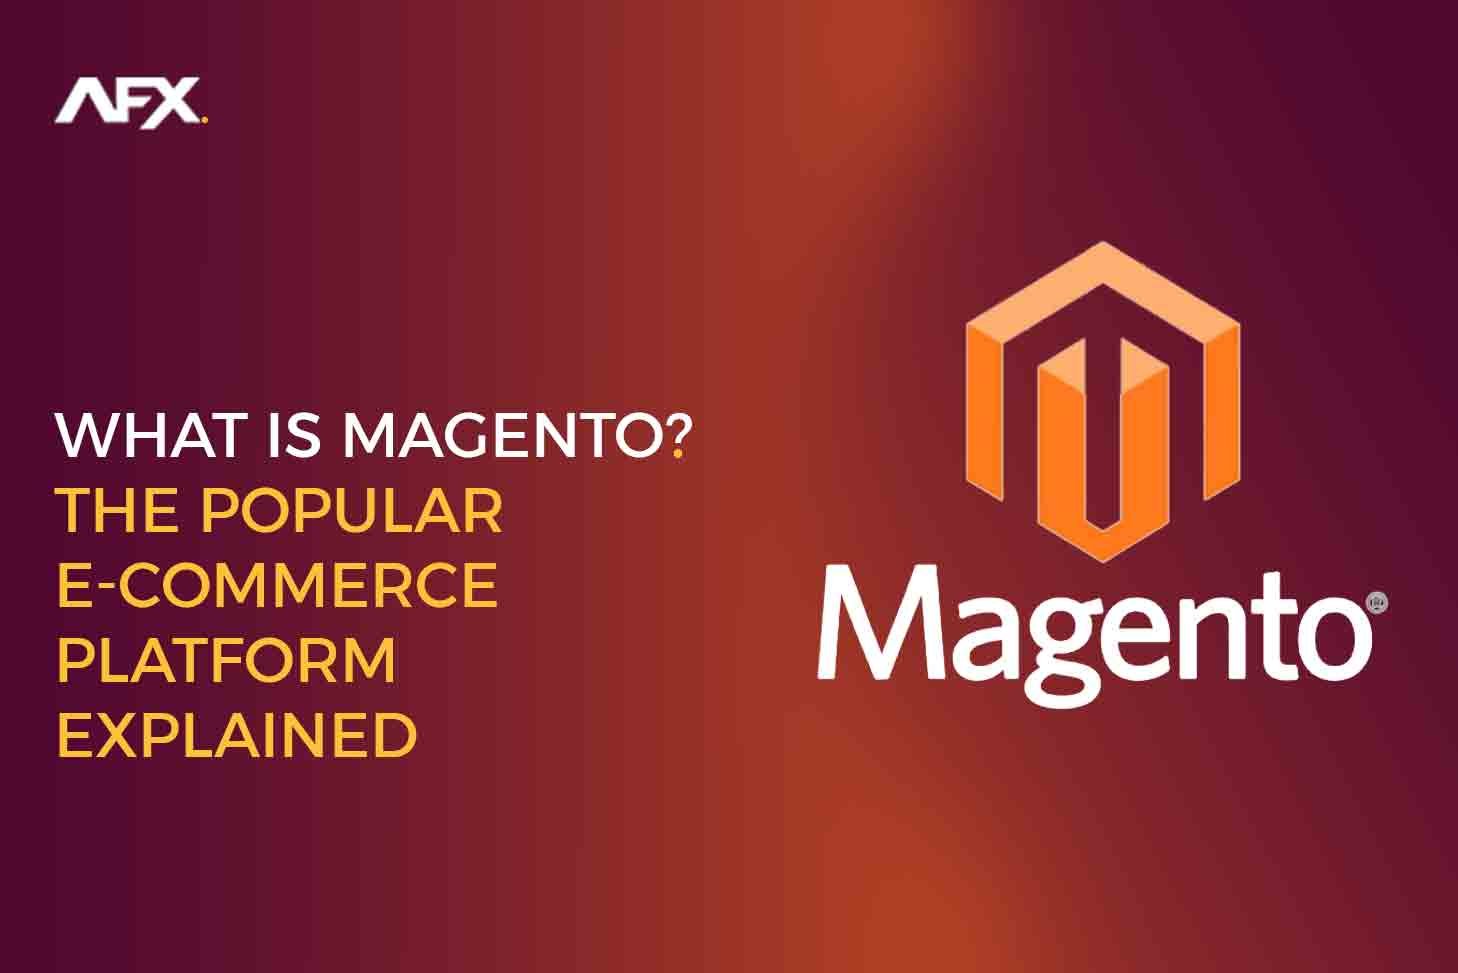 What is magento